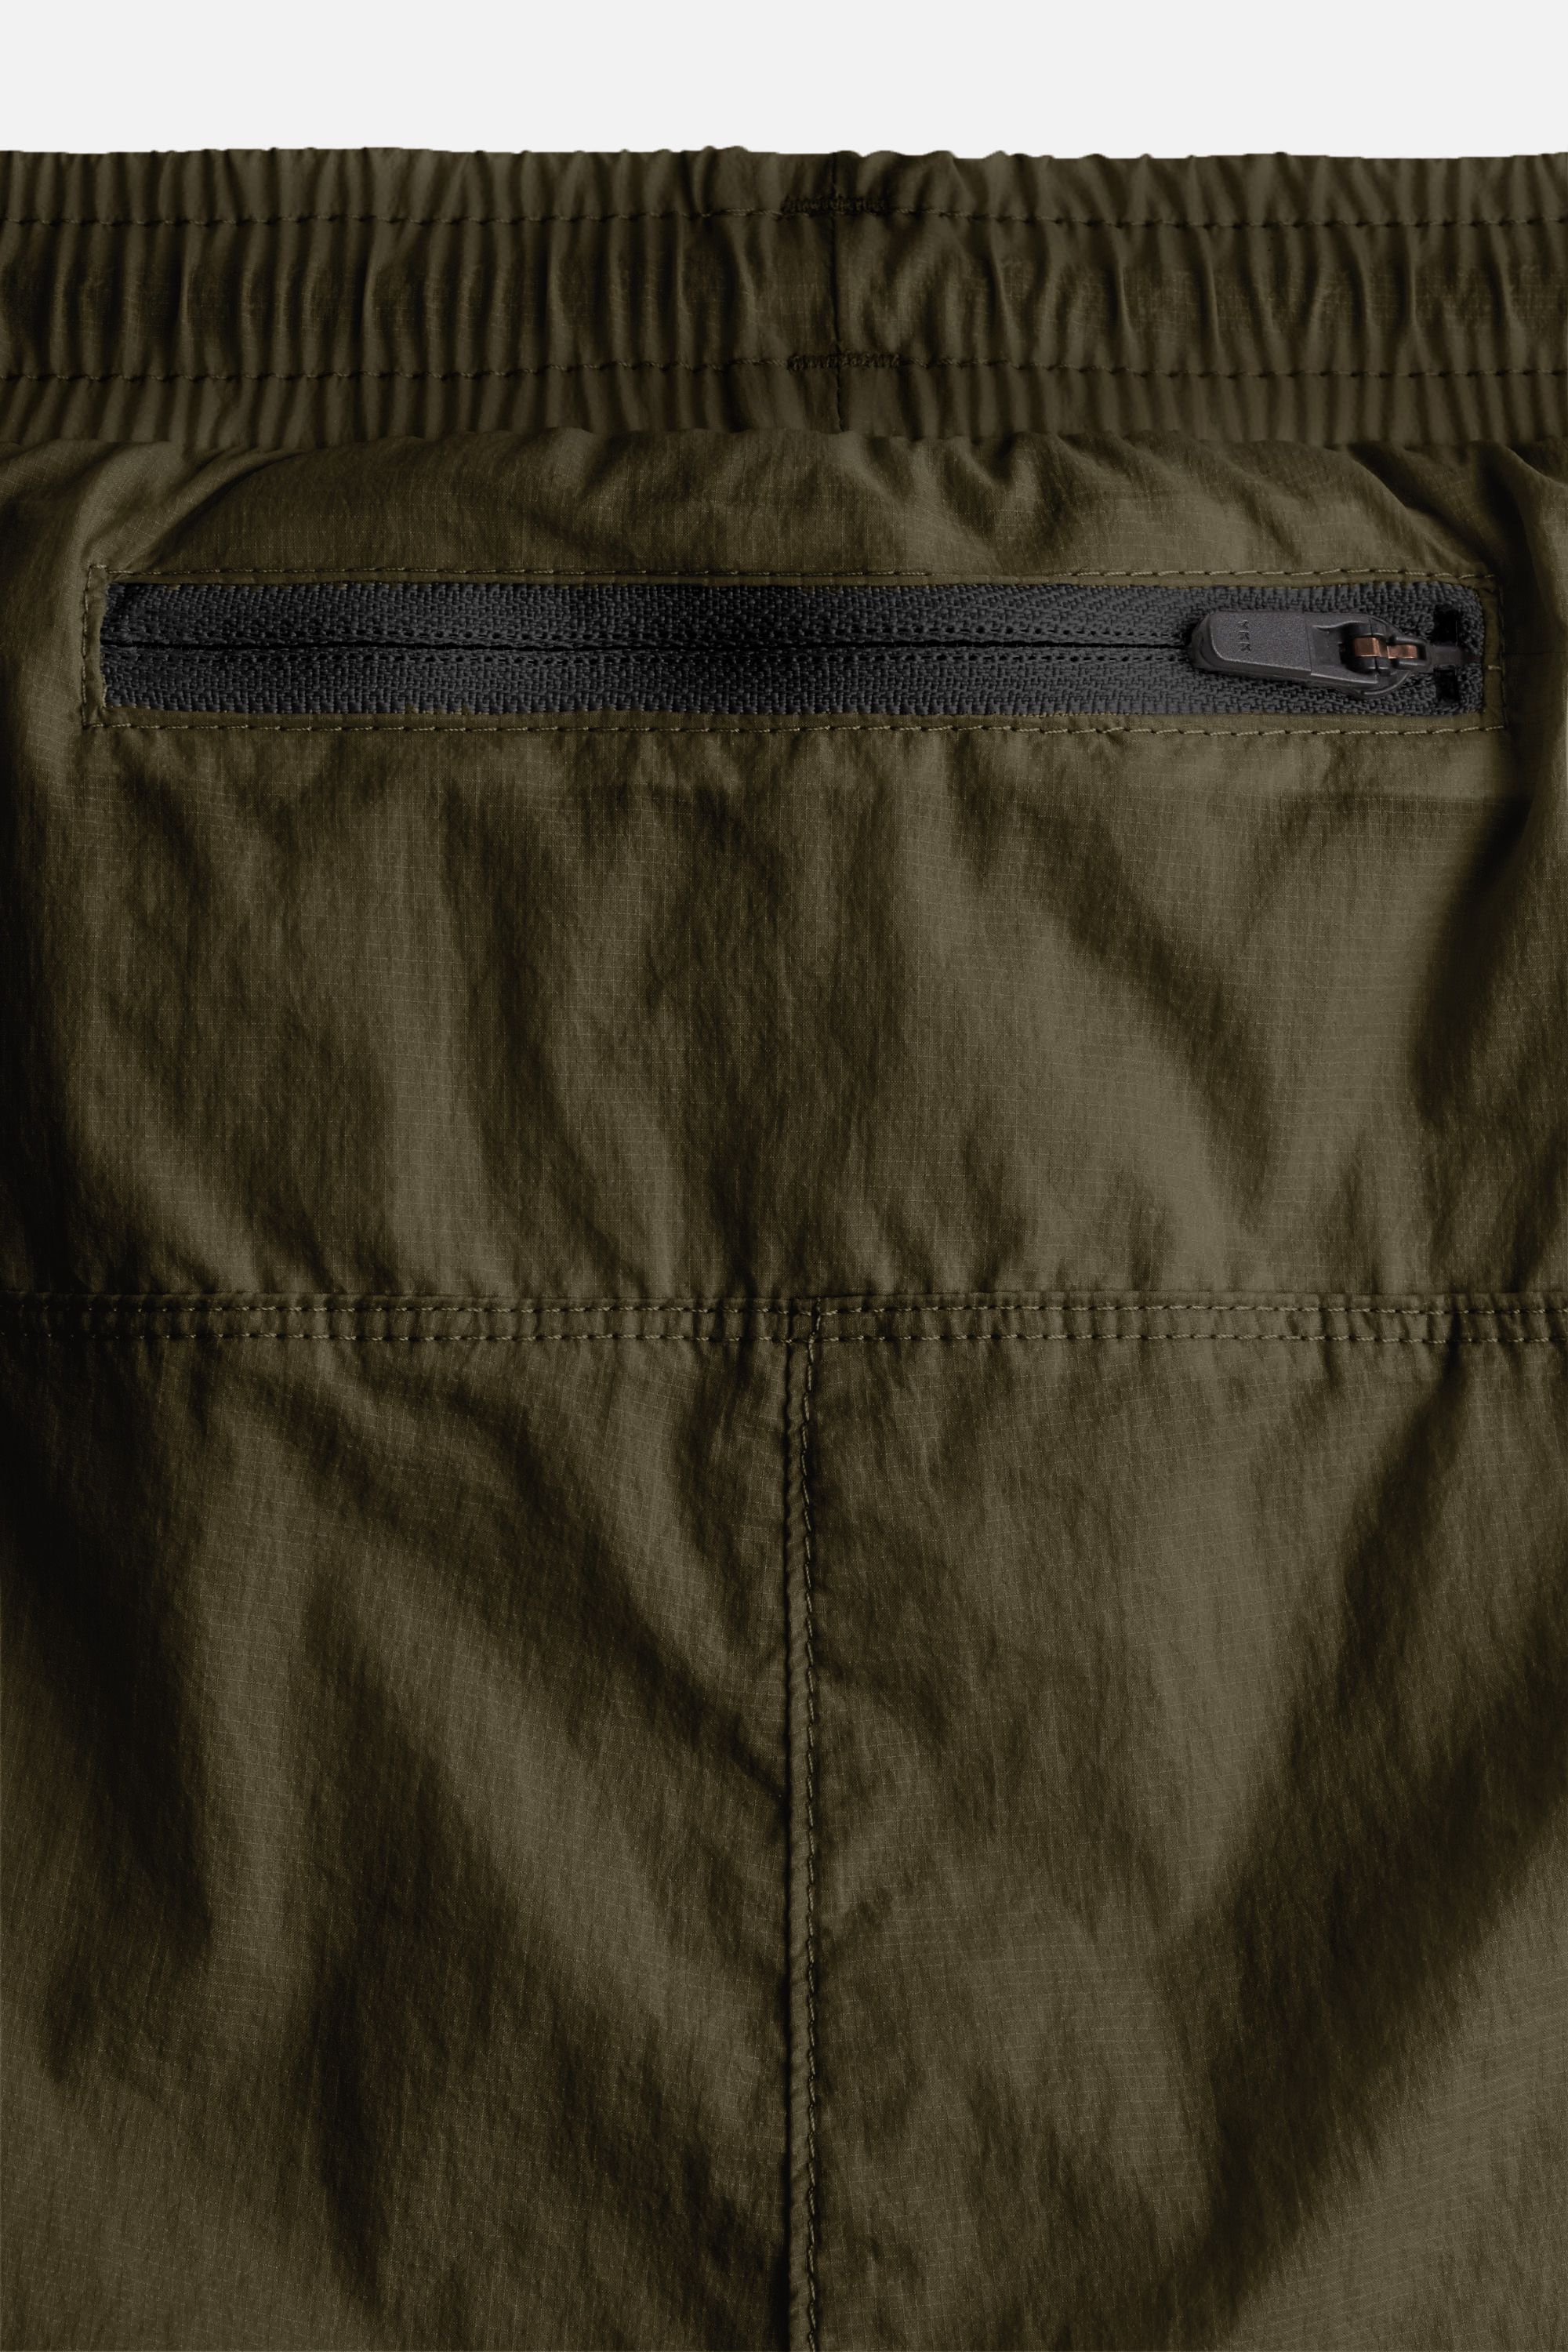 Ripstop Layered Trail Shorts, Olive